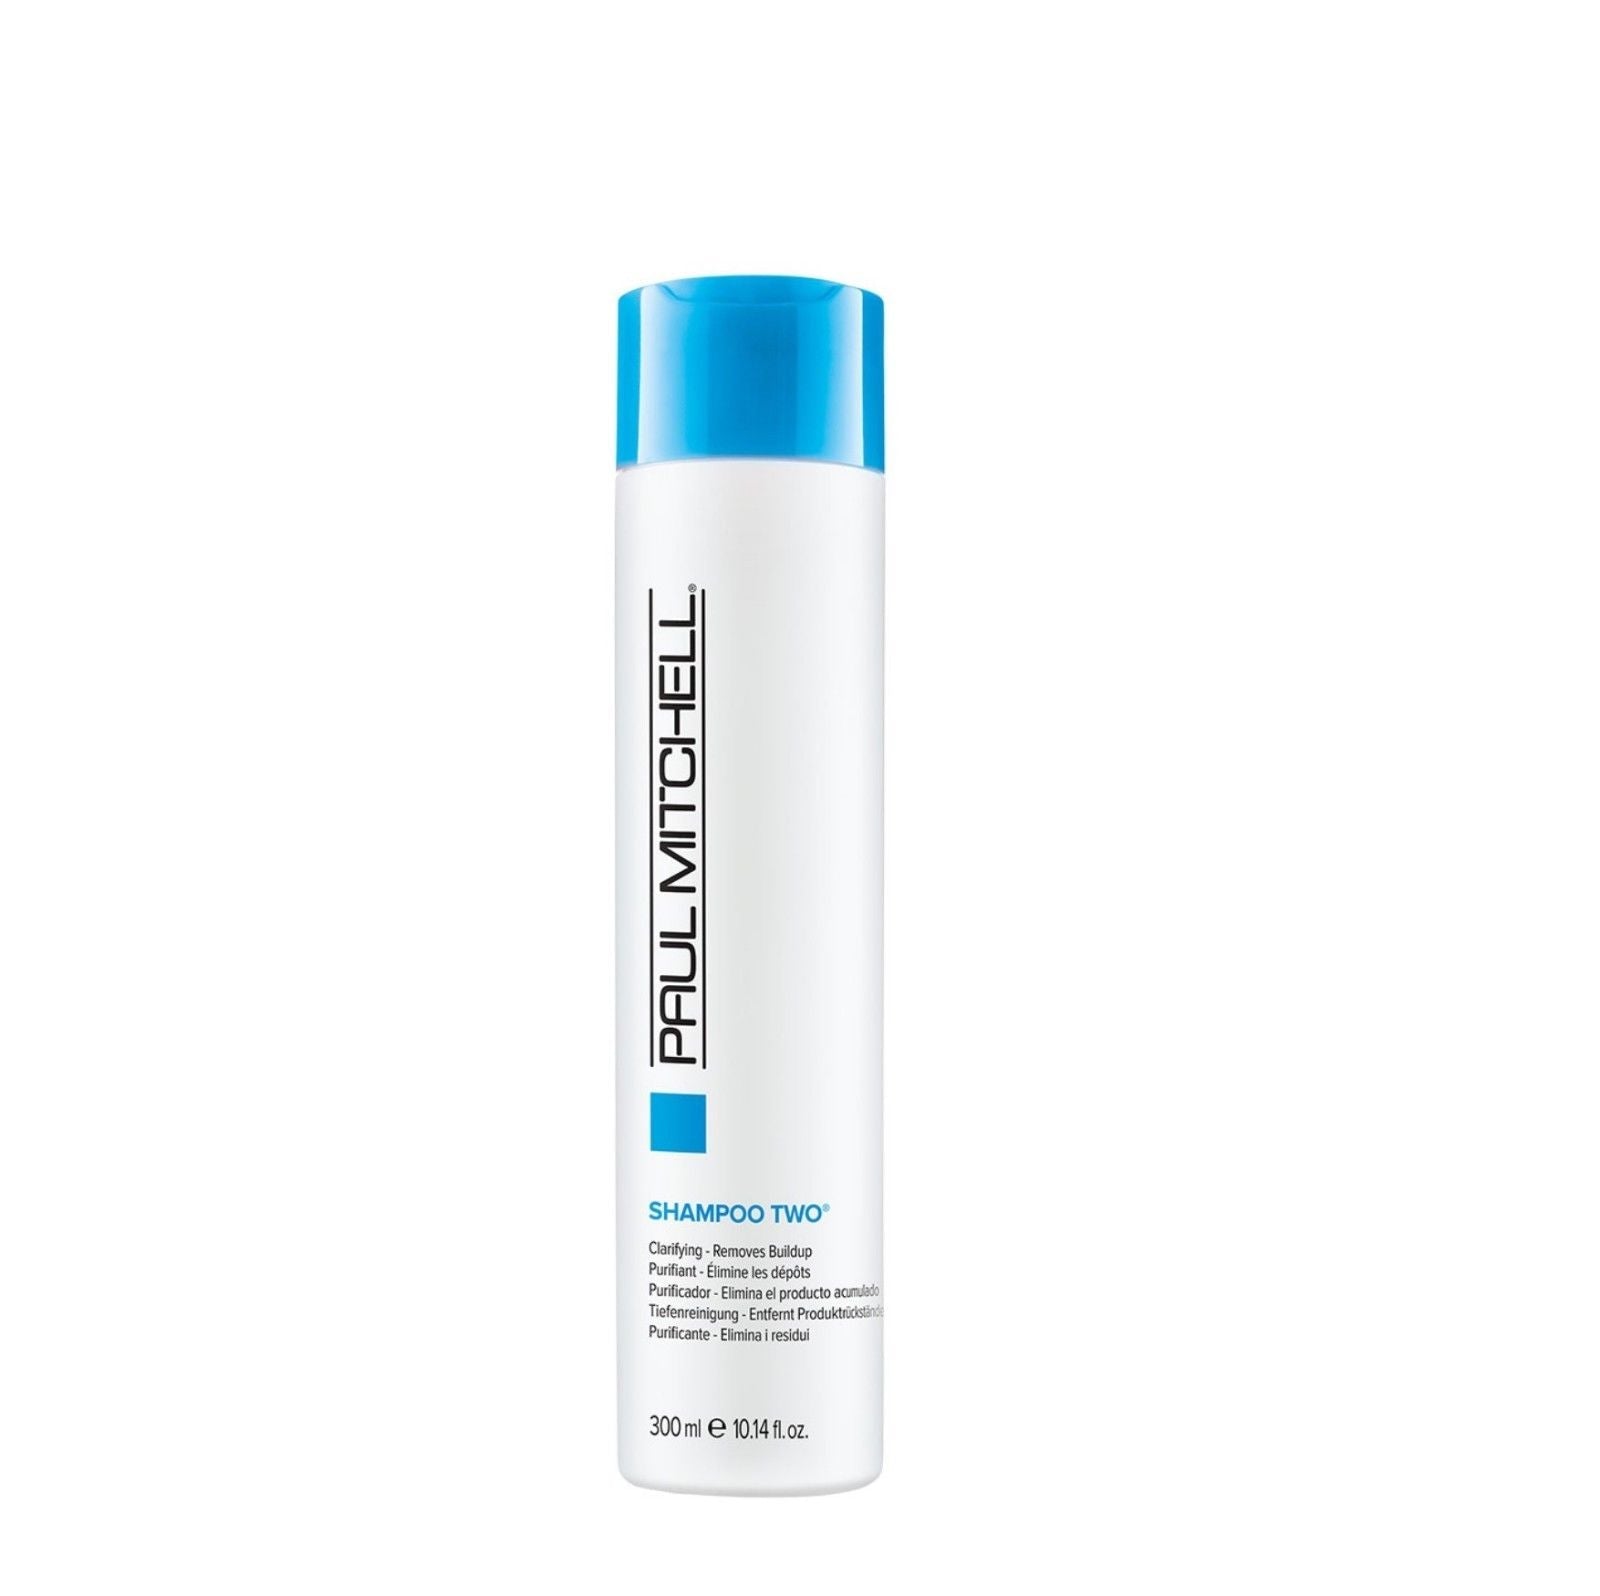 Paul Mitchell Shampoo Two Clarifying Removes Build up Shampoo 300ml - On Line Hair Depot